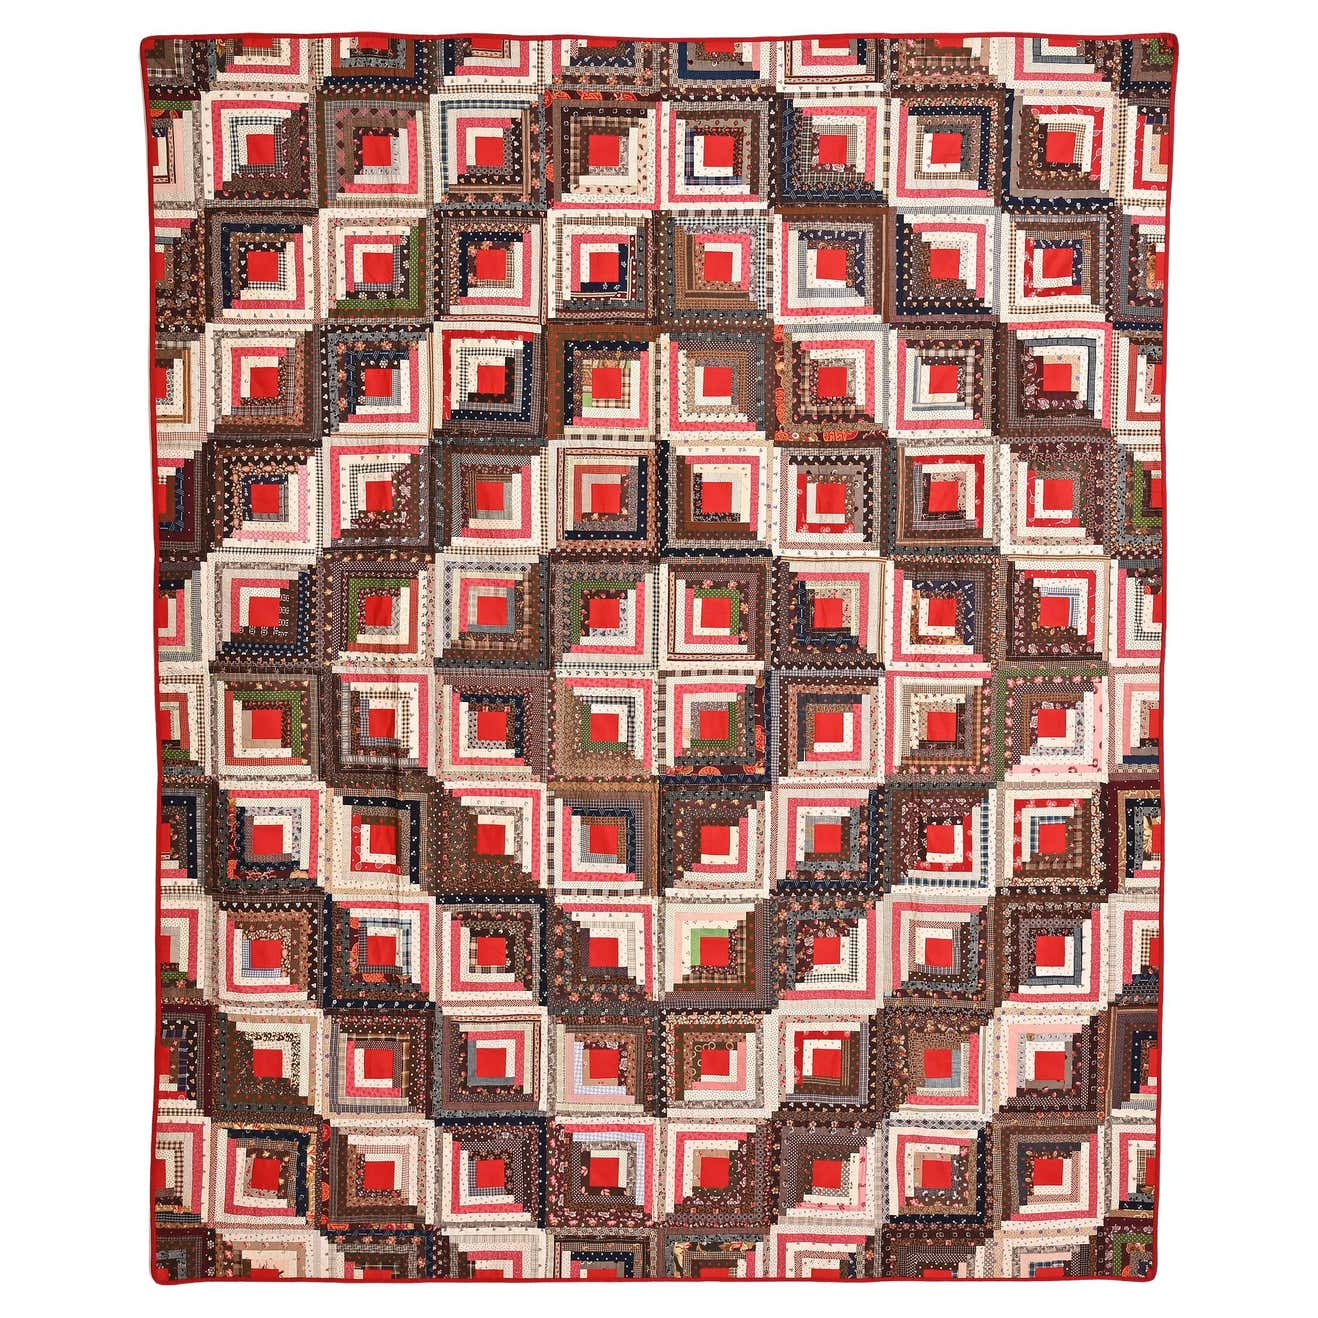 19th century Barn-raising Log Cabin Quilt with solid red centers next to printed multicolored fabrics.